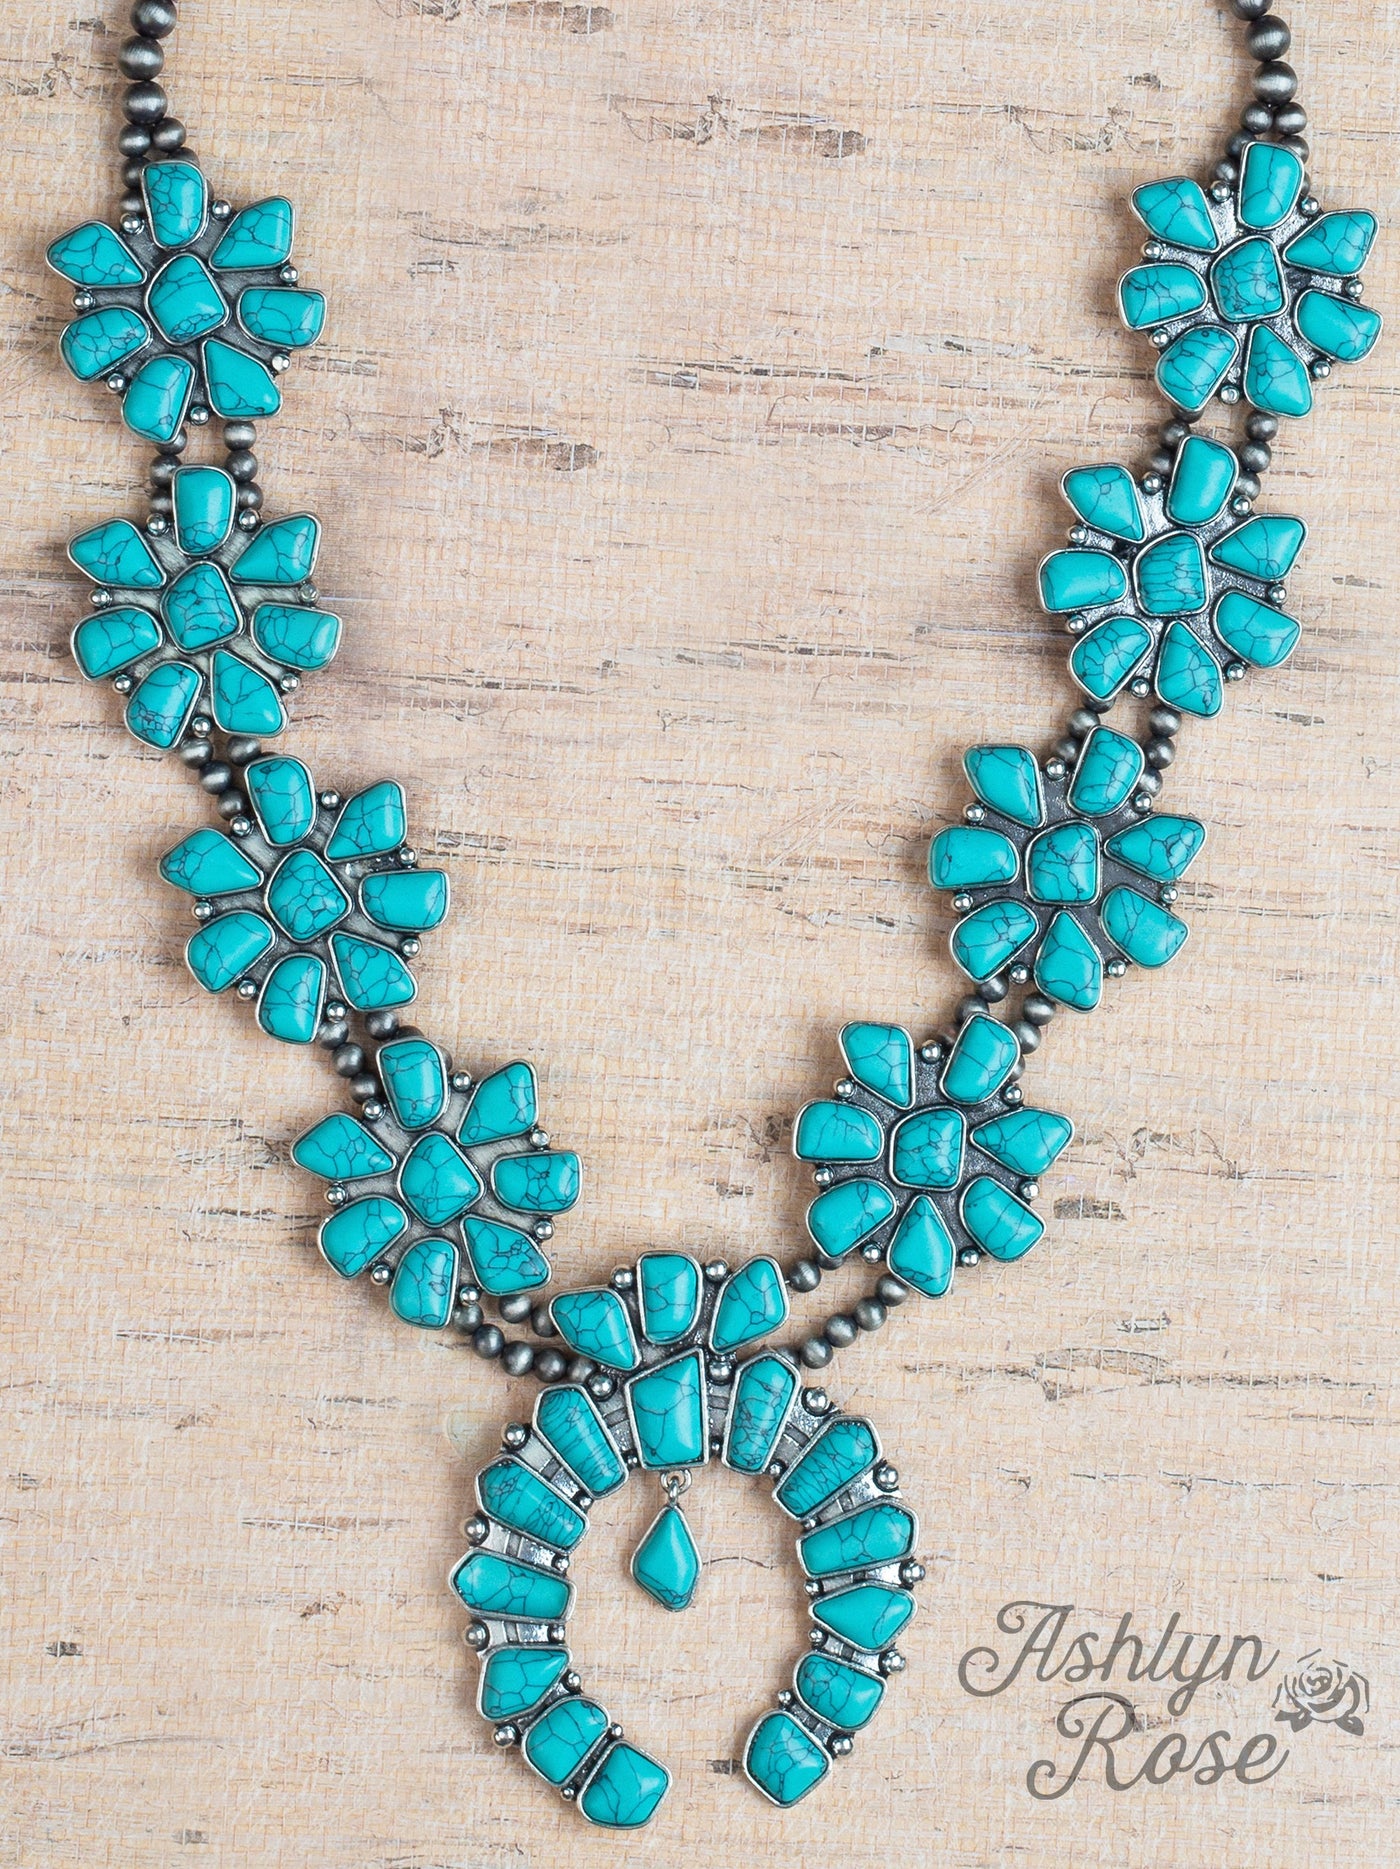 Will Die Standin' Up Turquoise Squash Blossom Necklace with Silver